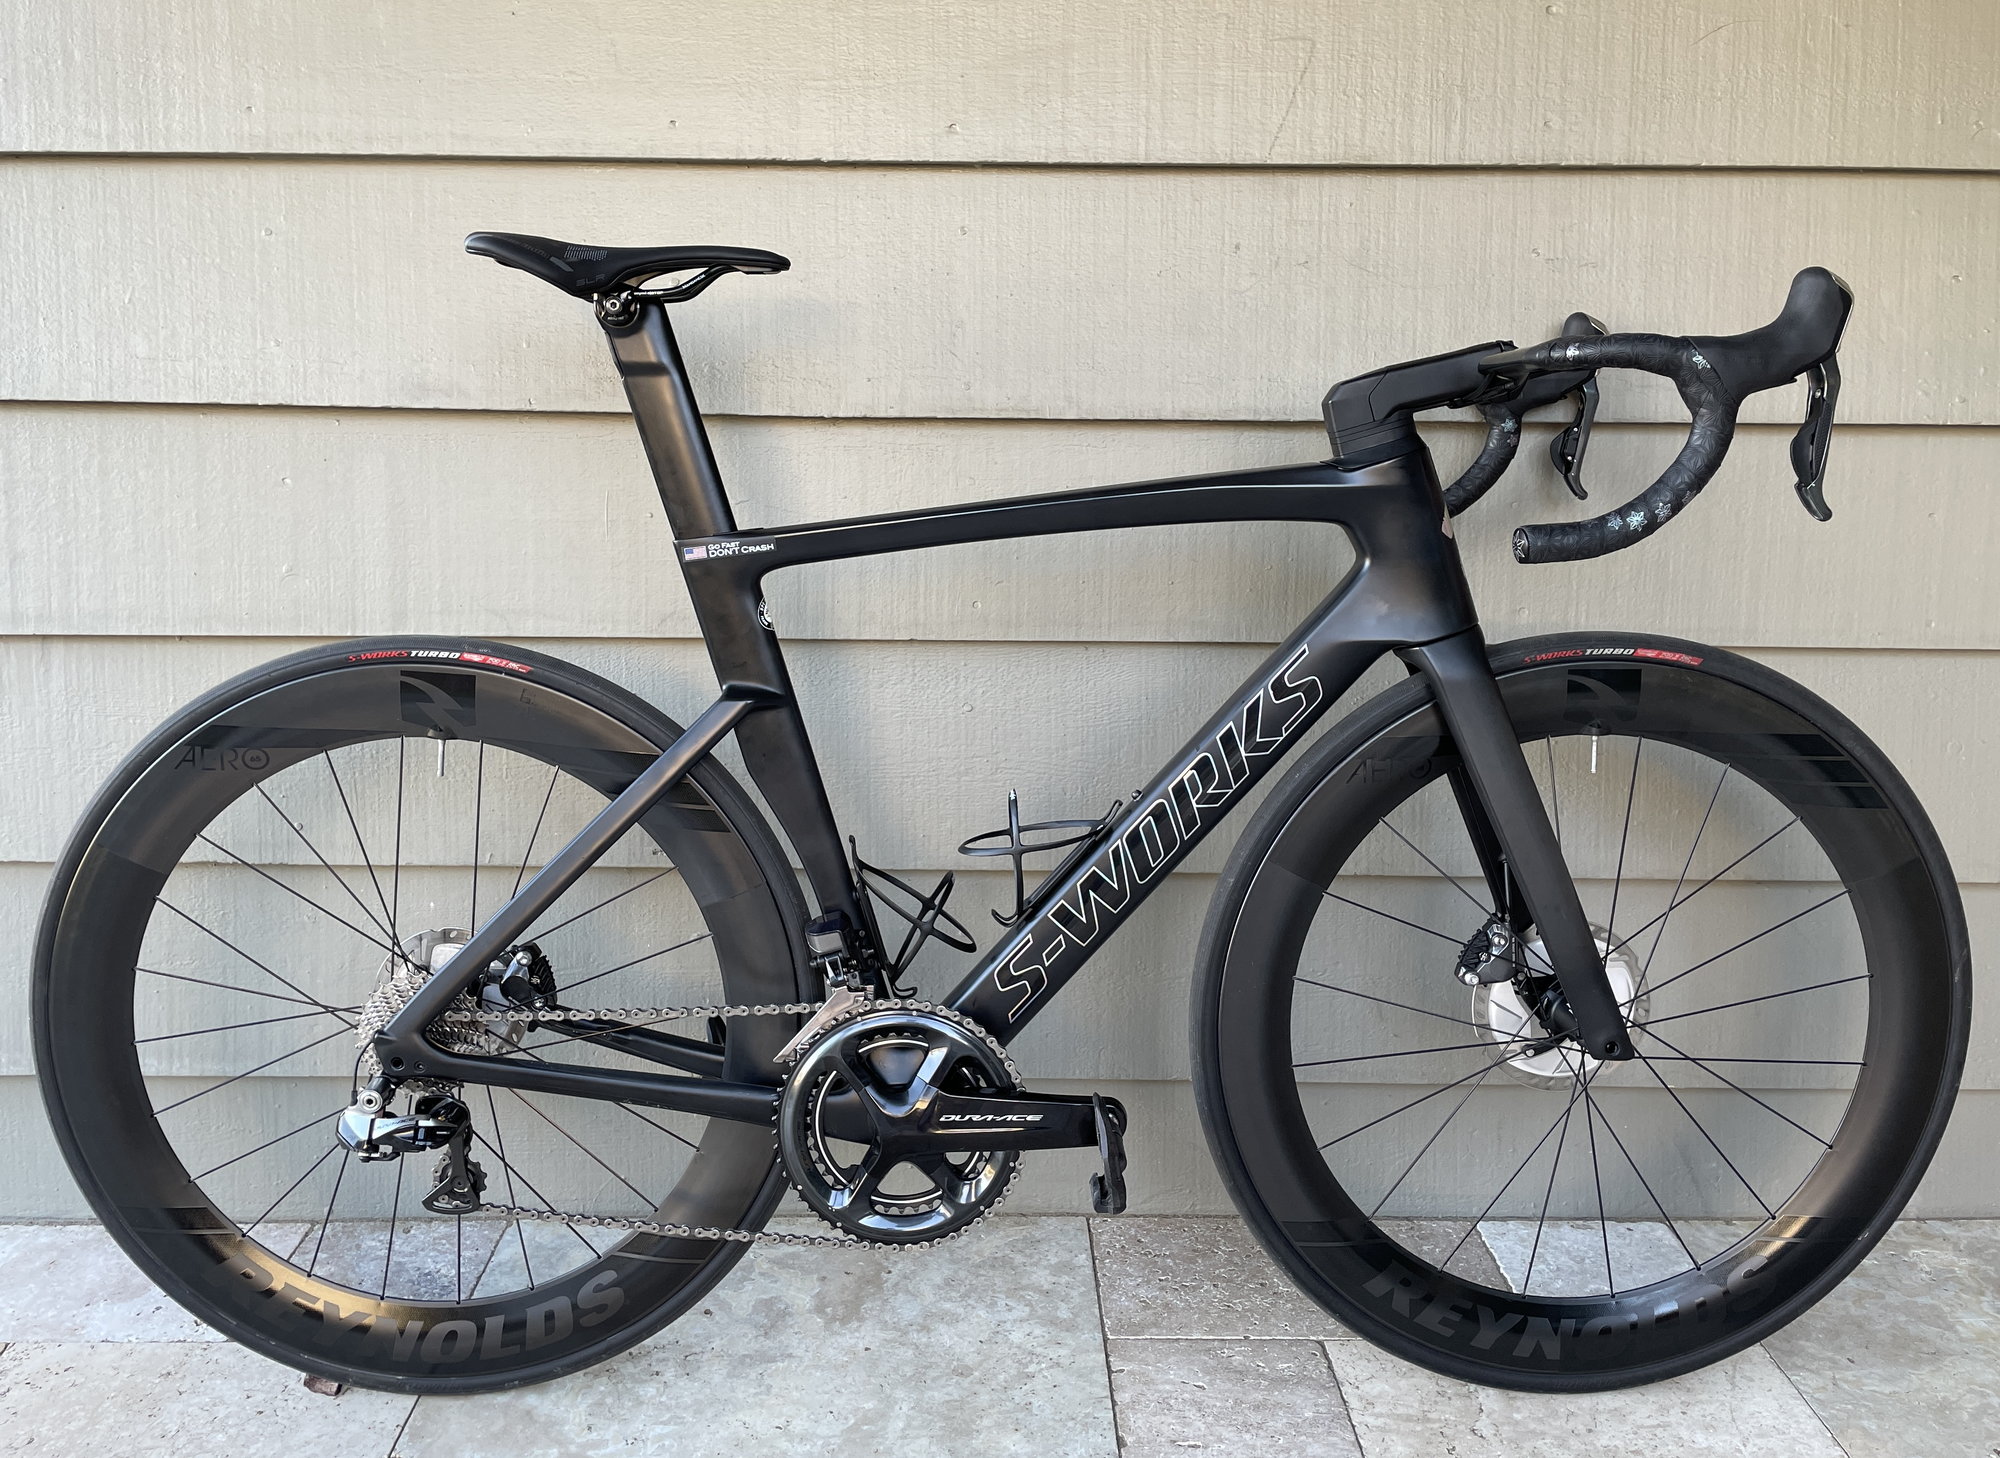 The Newest and Most Improved Hot or Not - Page 56 - Bike Forums